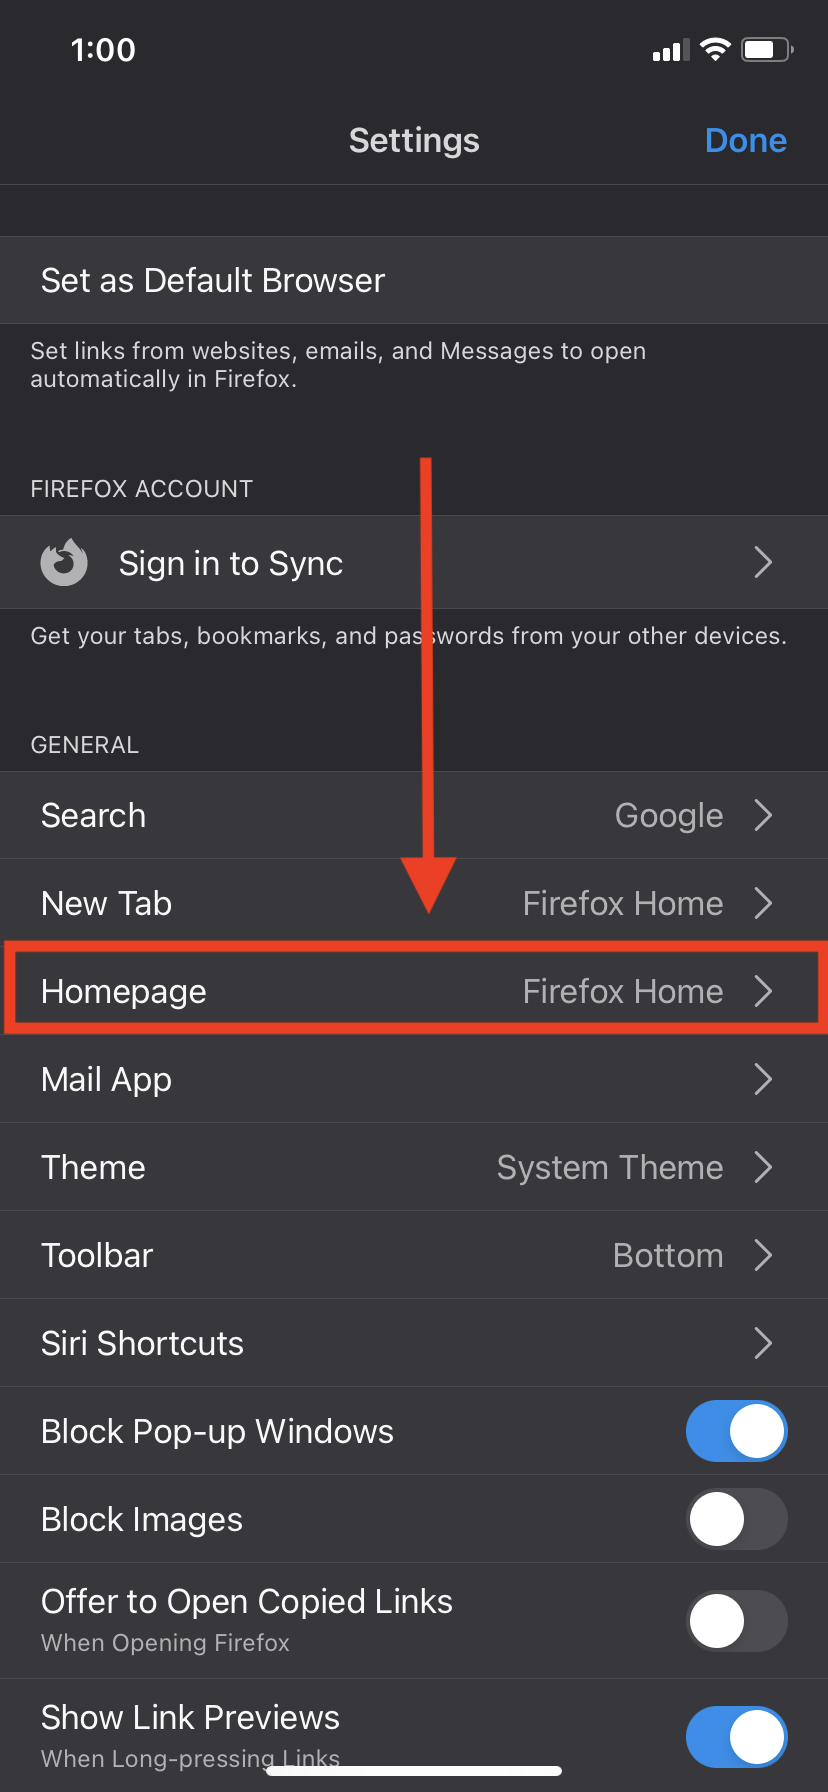 The settings menu of Firefox for iOS, with the Homepage menu highlighted.